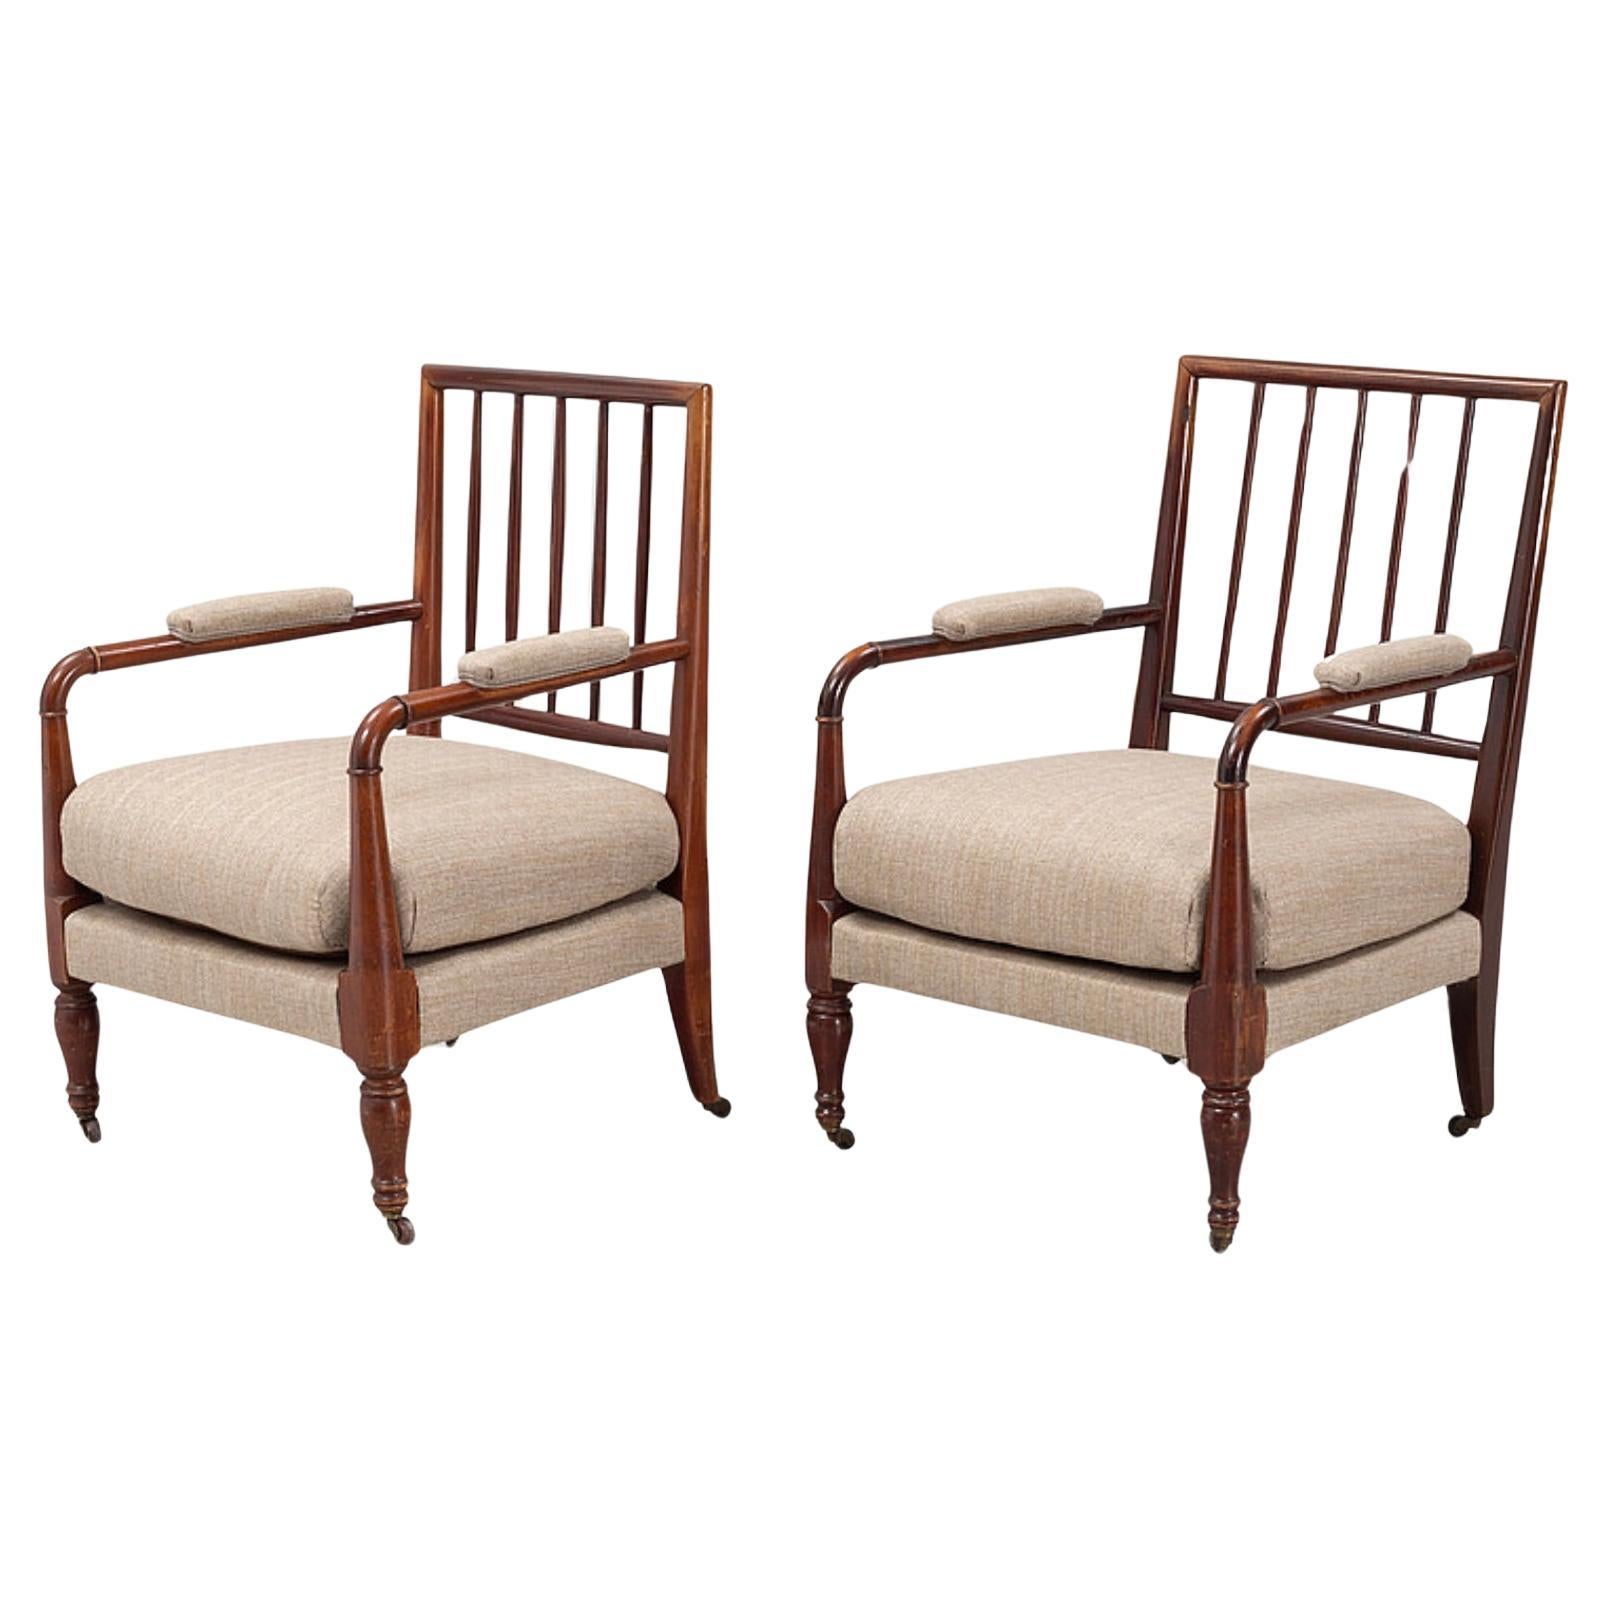 Pair of Circa 1900s Swedish Spindle Back Upholstered Mahogany Armchairs  For Sale